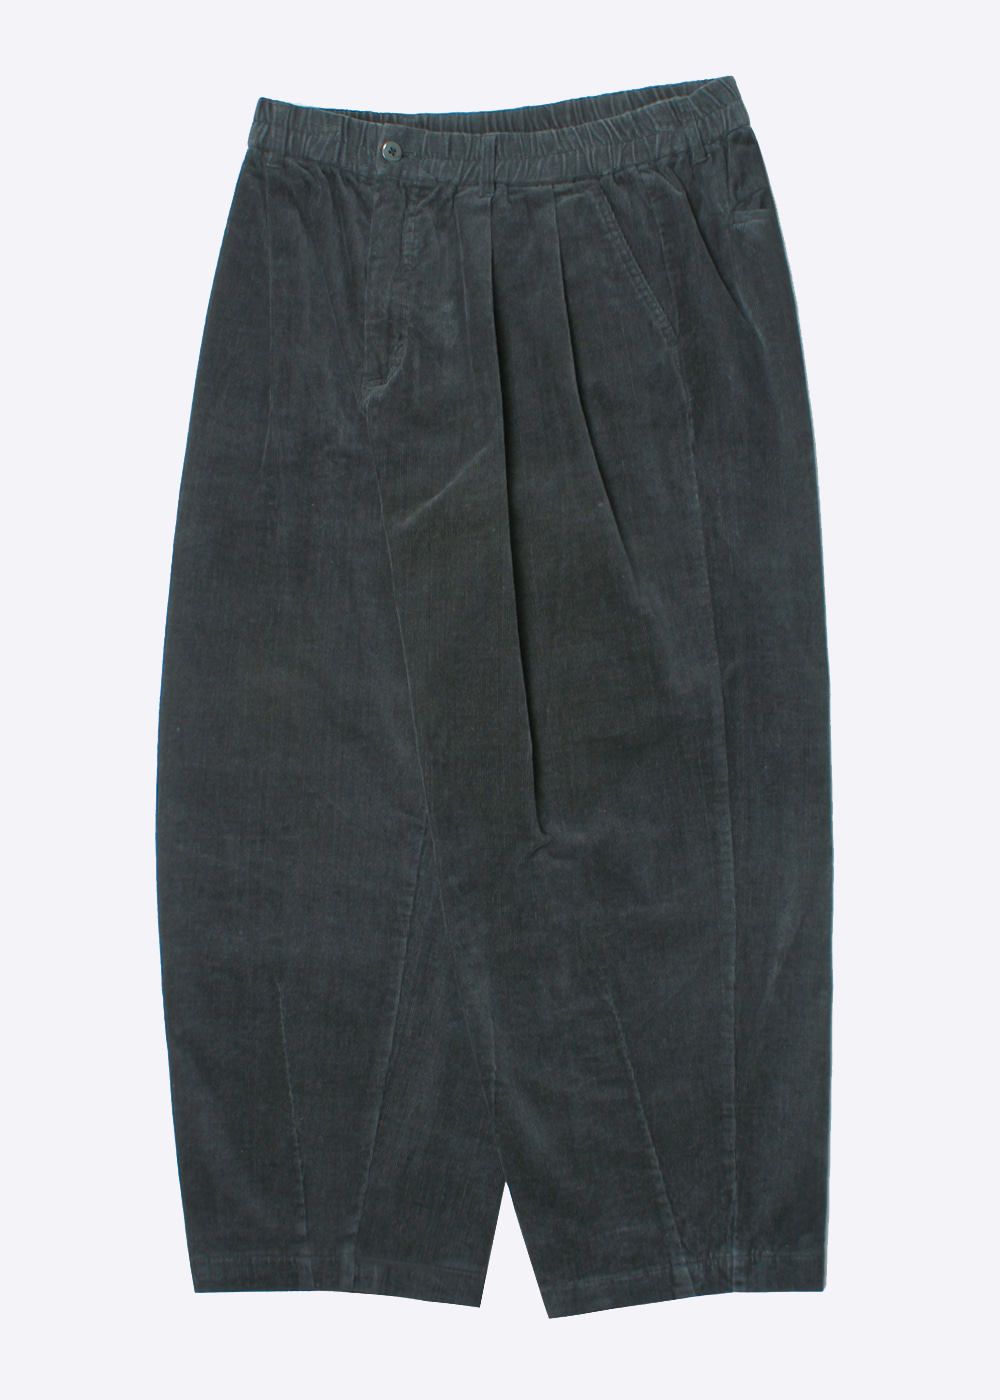 SENSE OF PLACE BY URBAN RESEARCH‘relexed fit’ corduroy hd pants